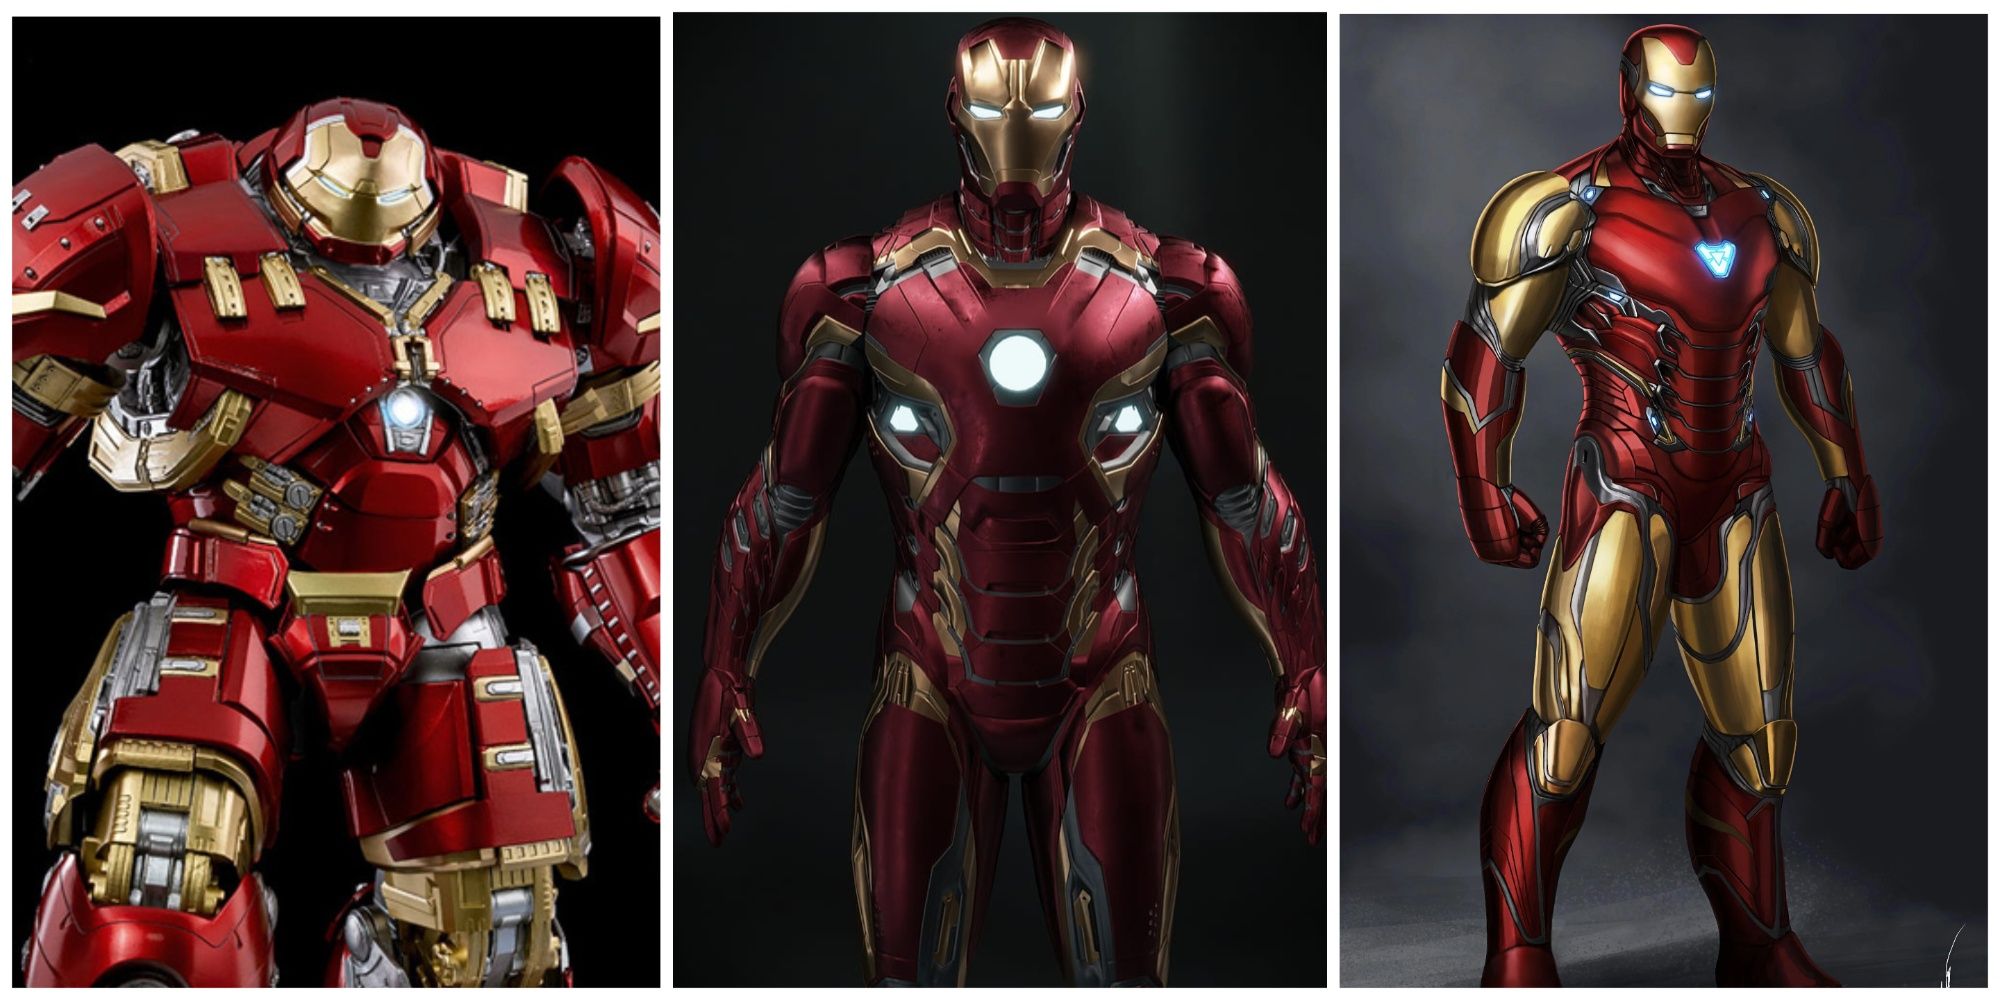 The Best Iron Man Suits from the MCU, Ranked